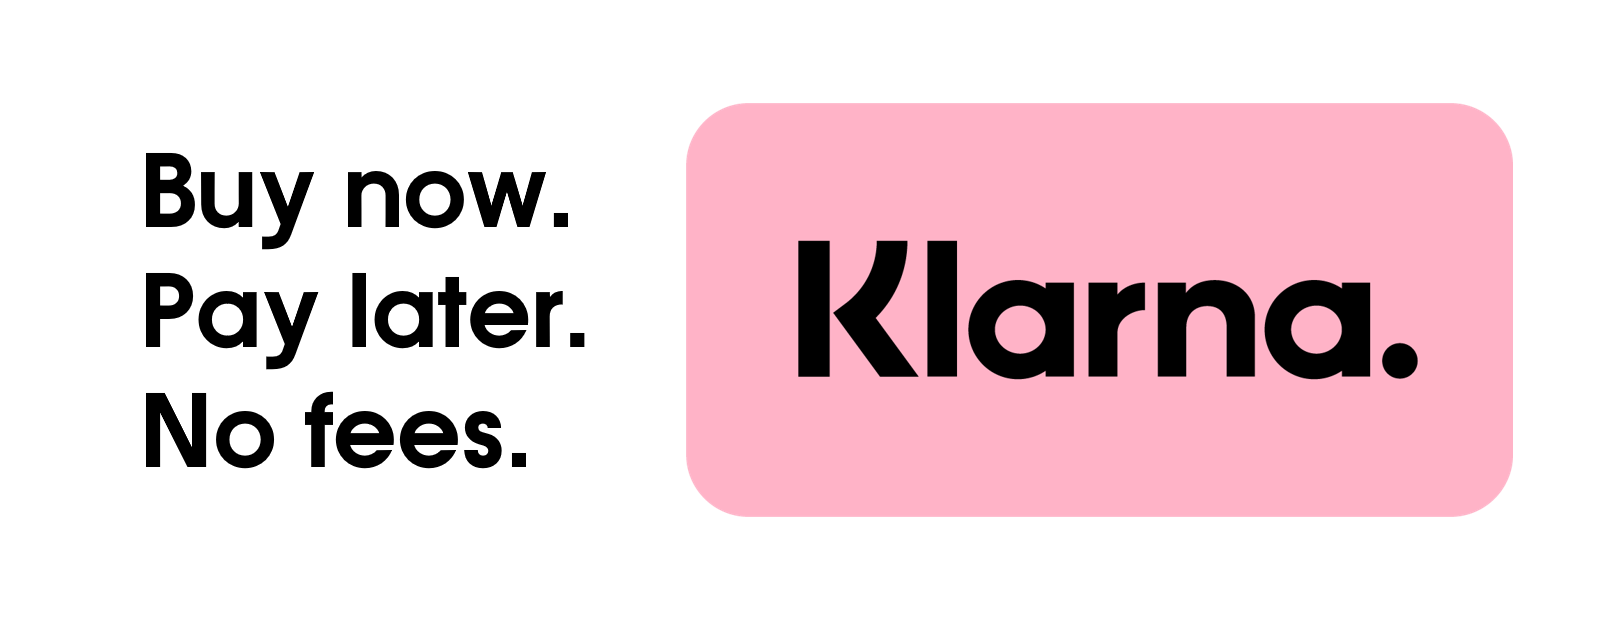 pay later with klarna